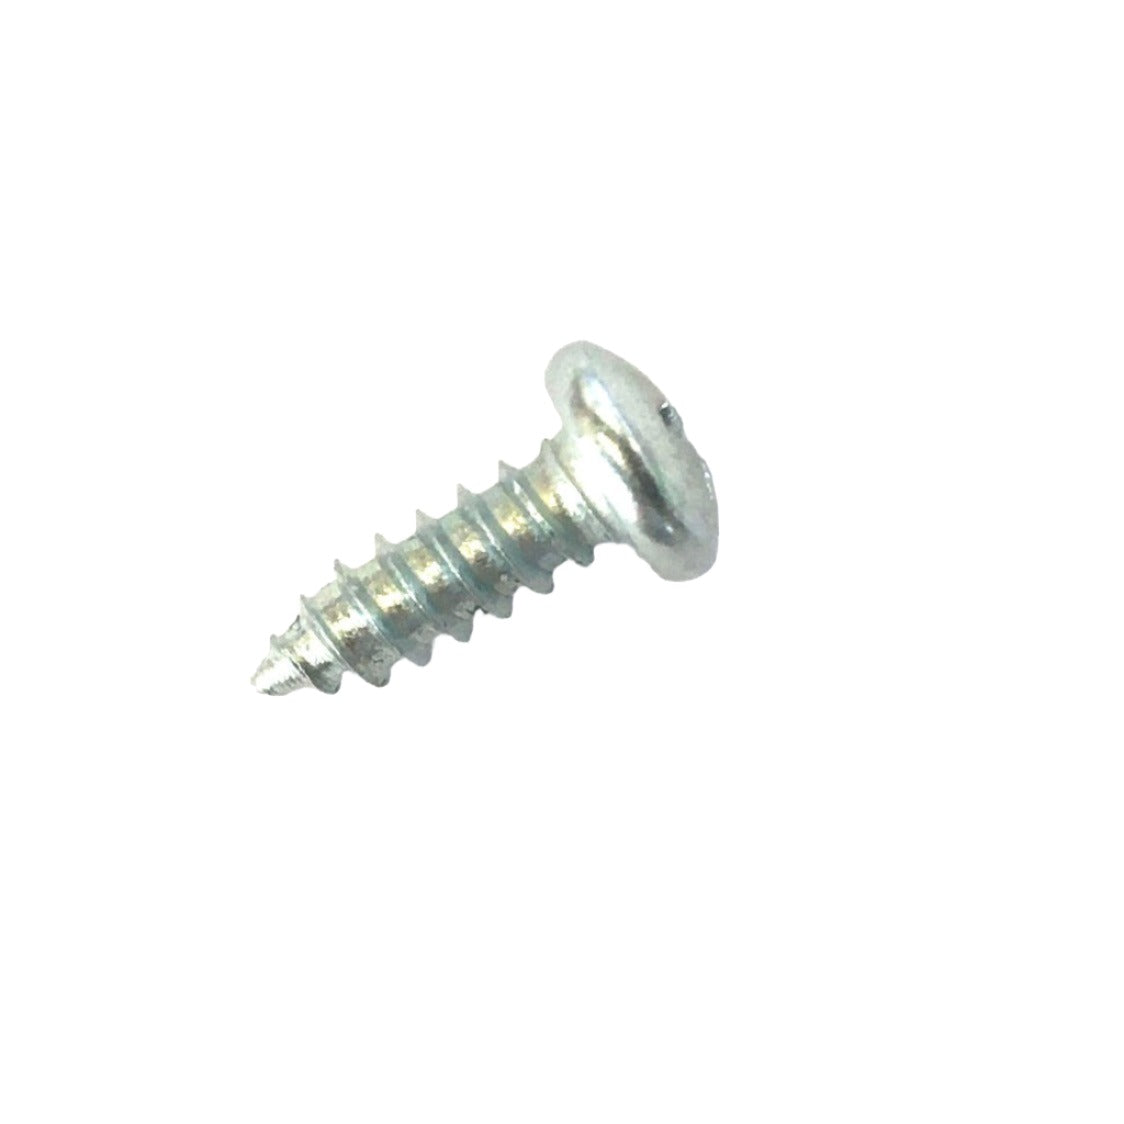 Airstream #8 x 1/2" Phillips Type A Wood Sheet Metal Screw - 320035